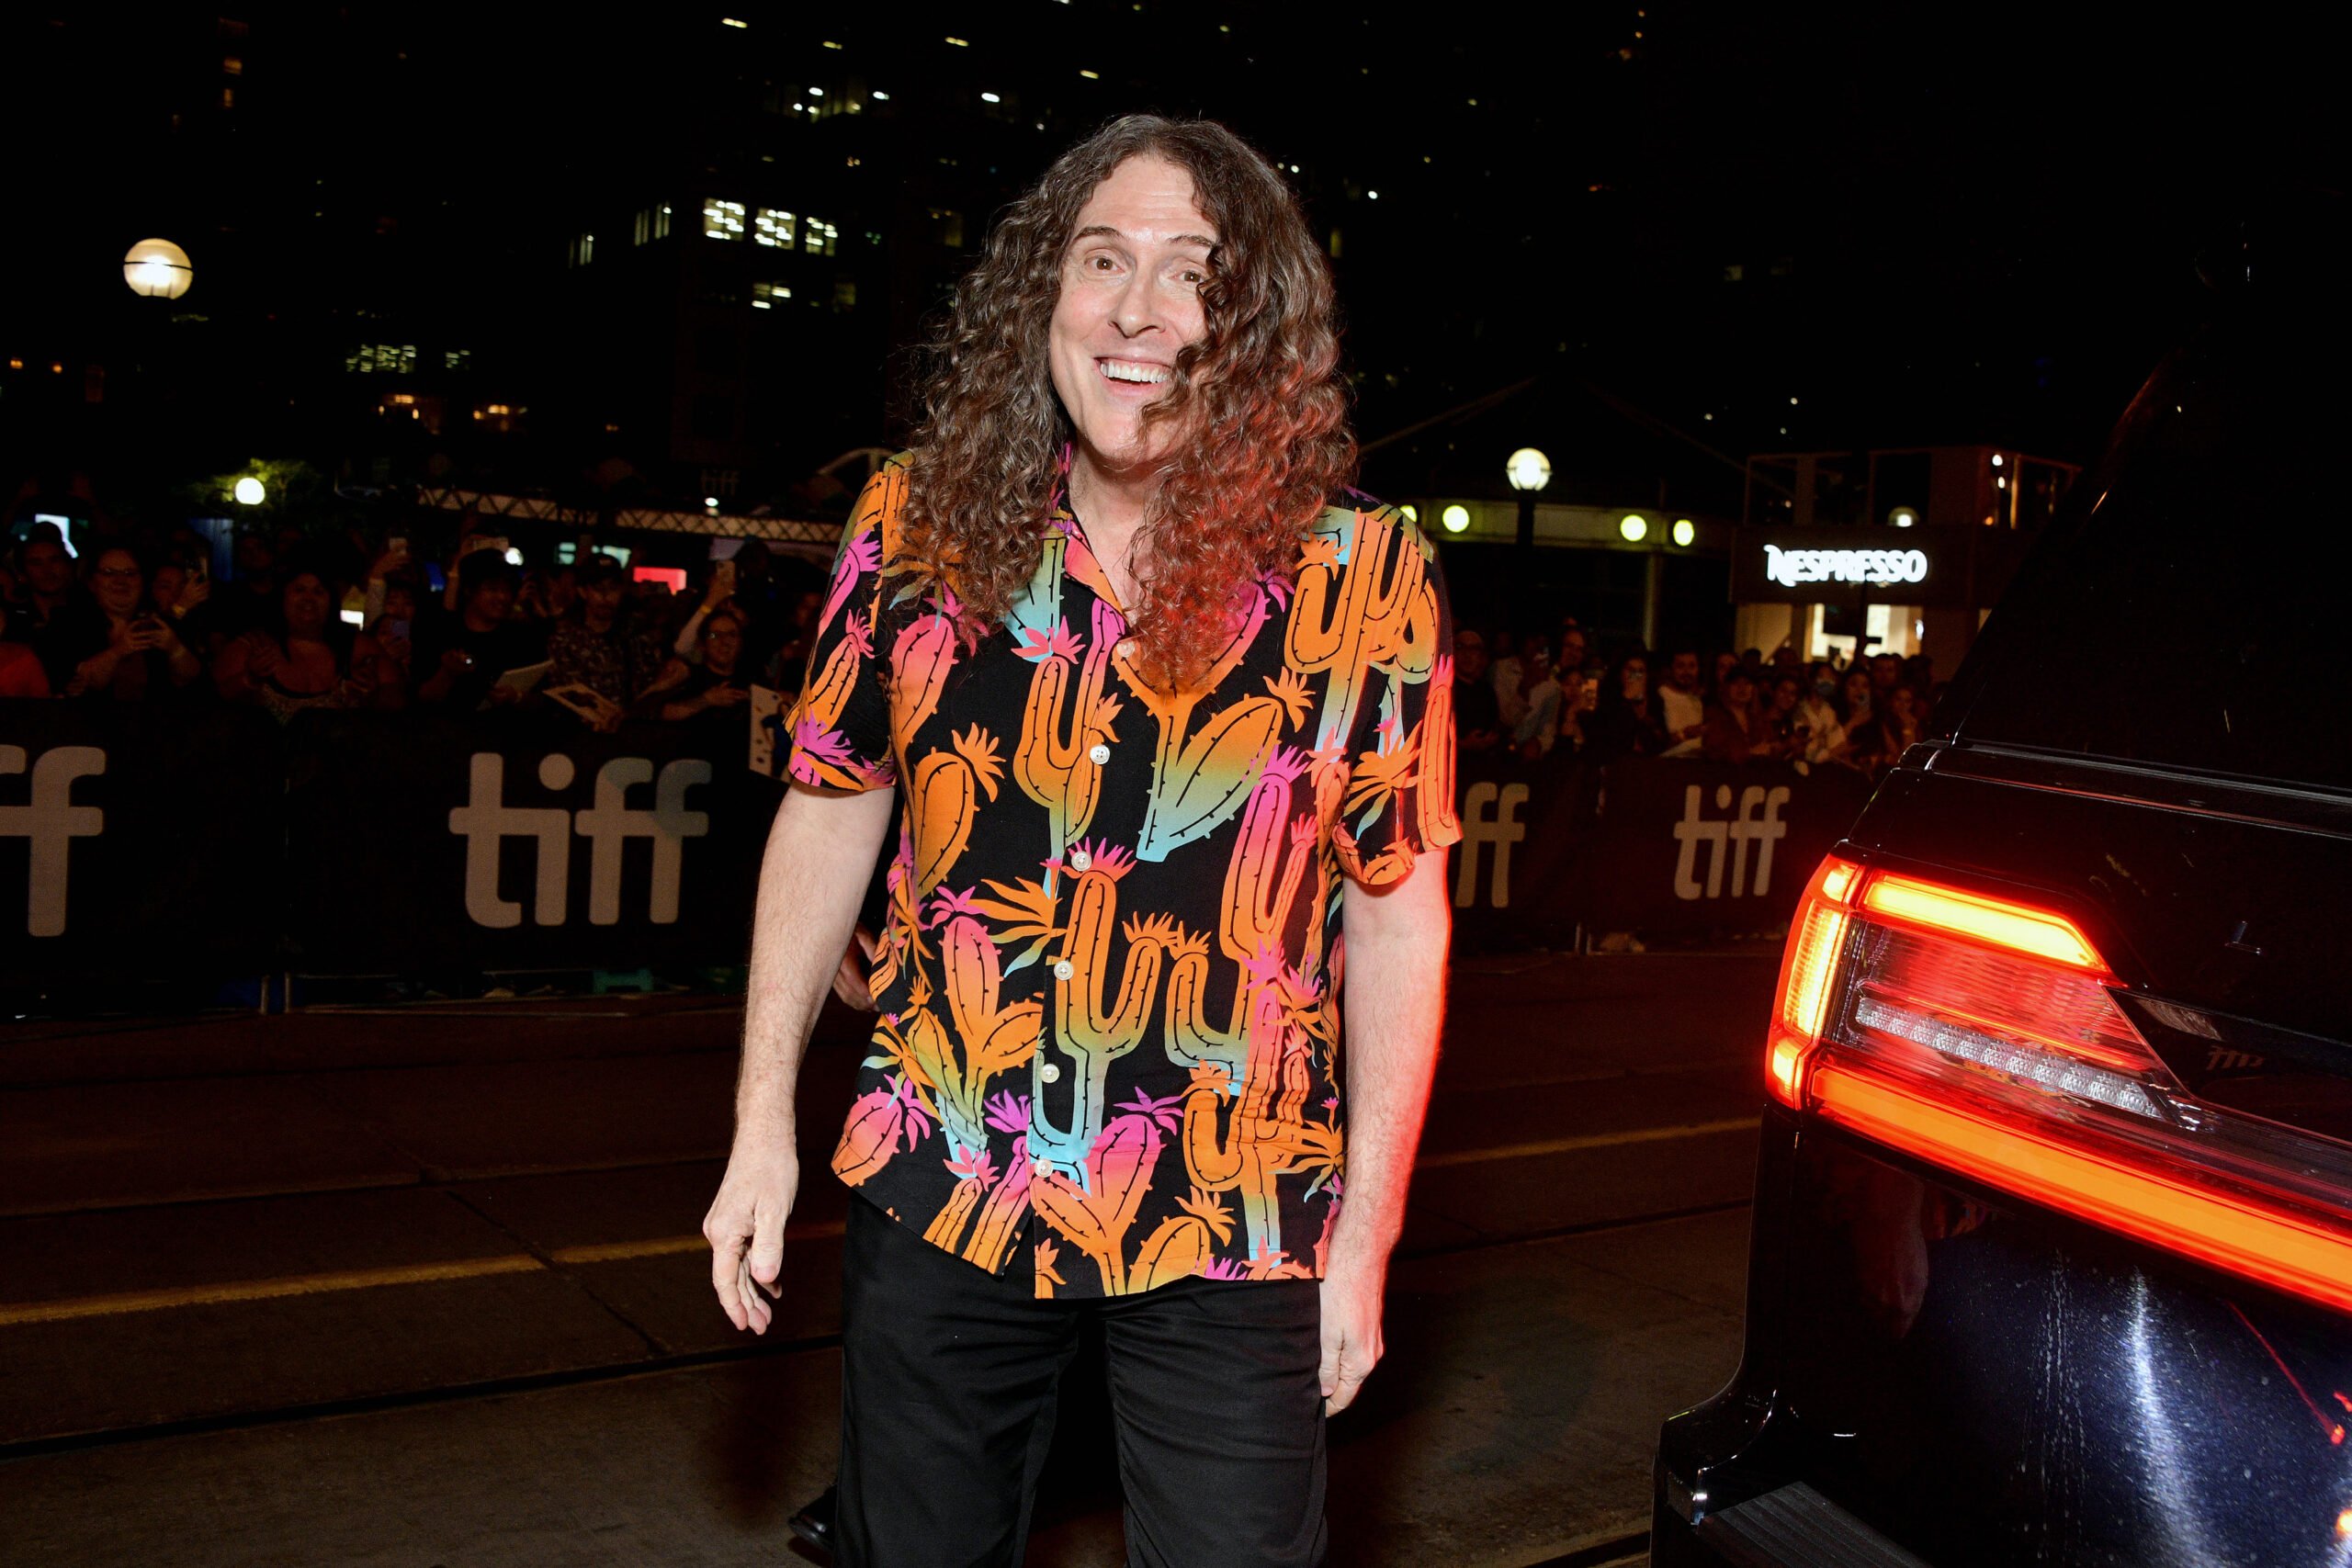 How Old Is Weird Al Yankovic and What's His Net Worth?